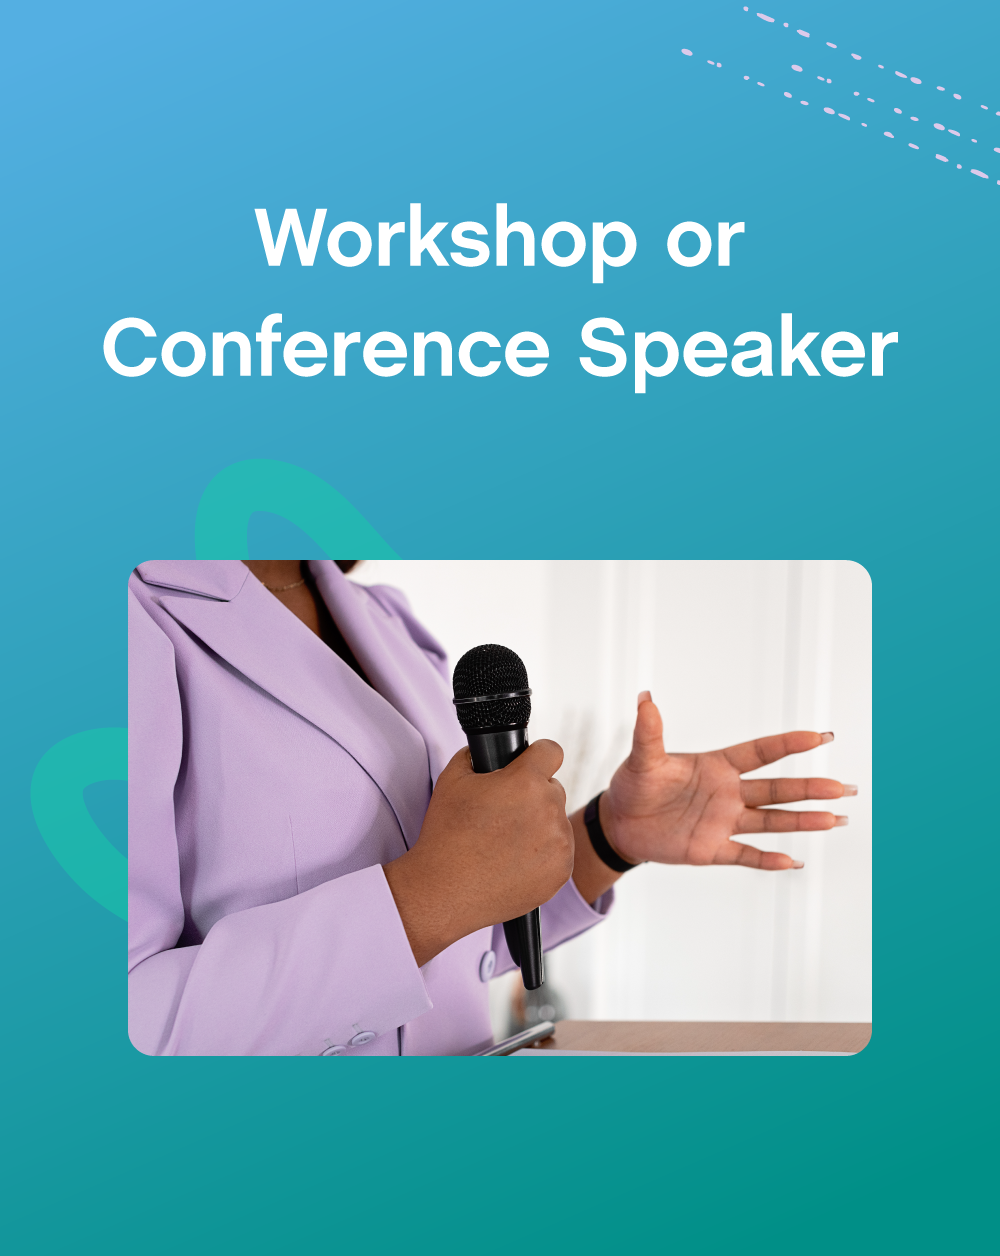 Workshop or Conference Speaker Contract Template - The Contract Shop®